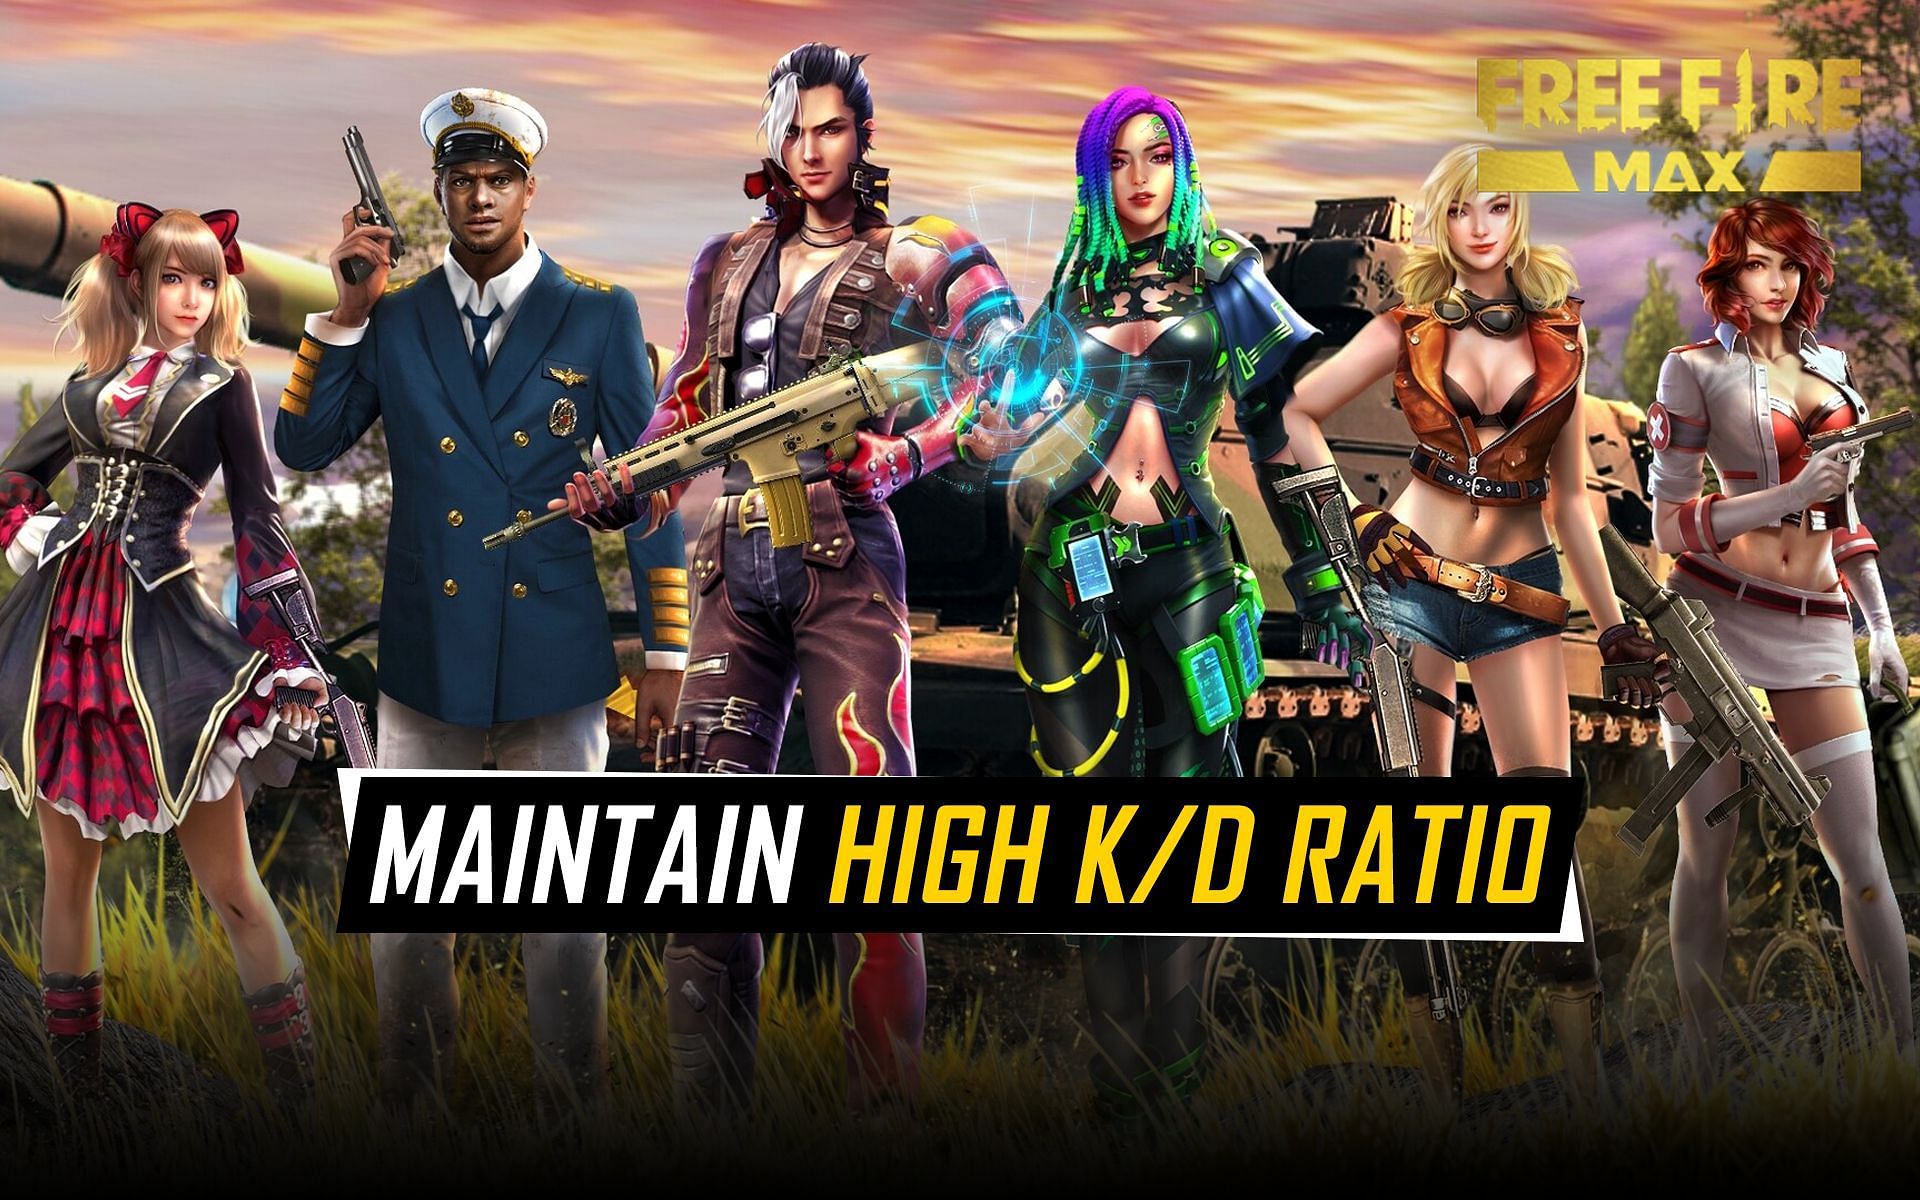 Maintain a high K/D ratio in Free Fire MAX by following these simple tips (Image via Sportskeeda)